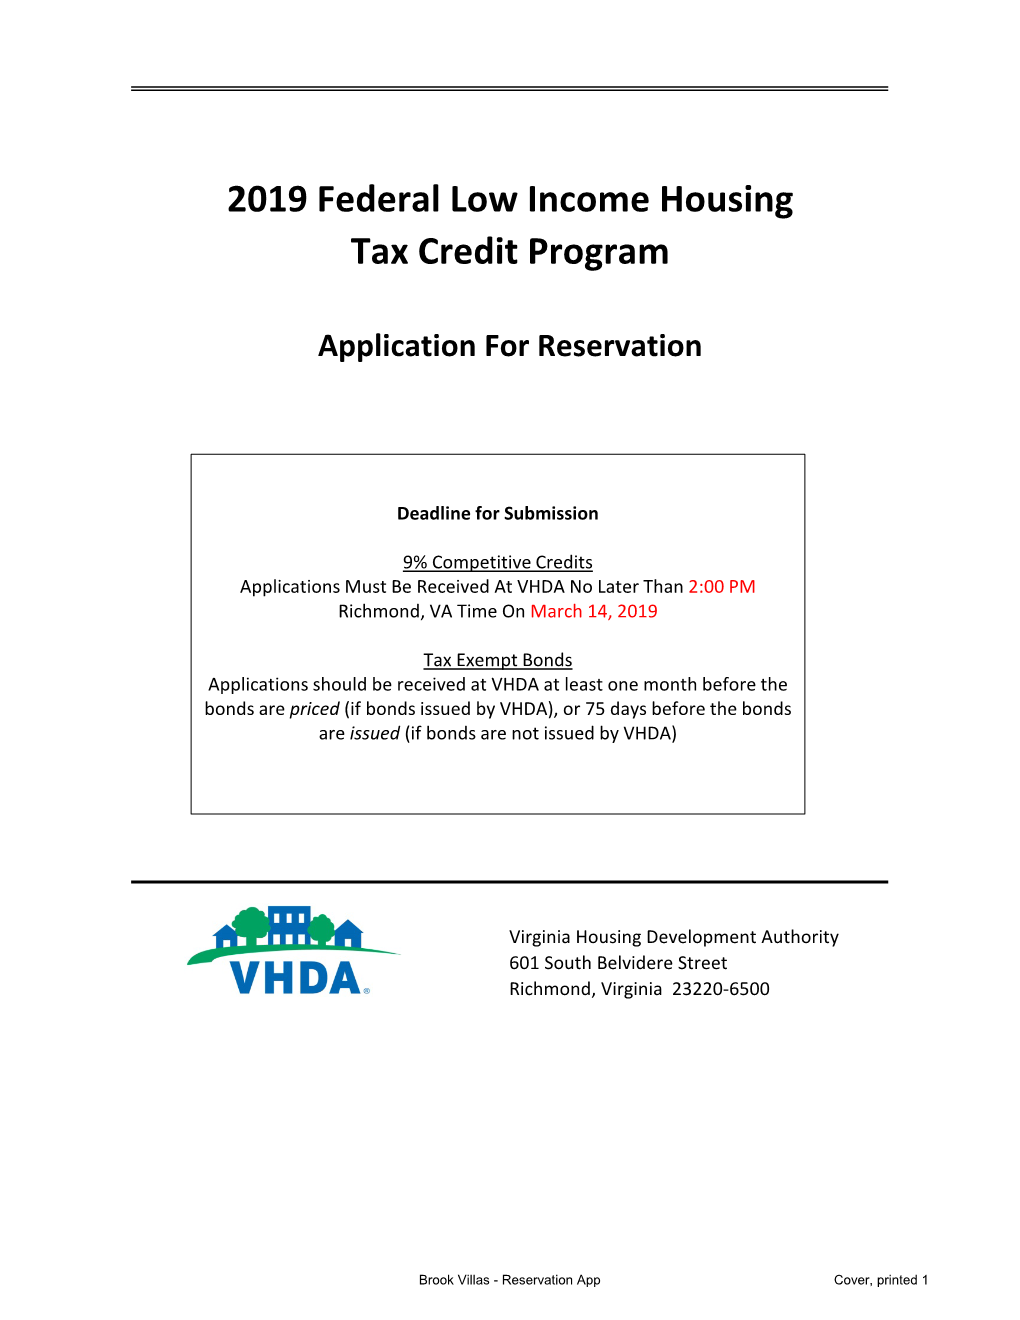 2019 Federal Low Income Housing Tax Credit Program